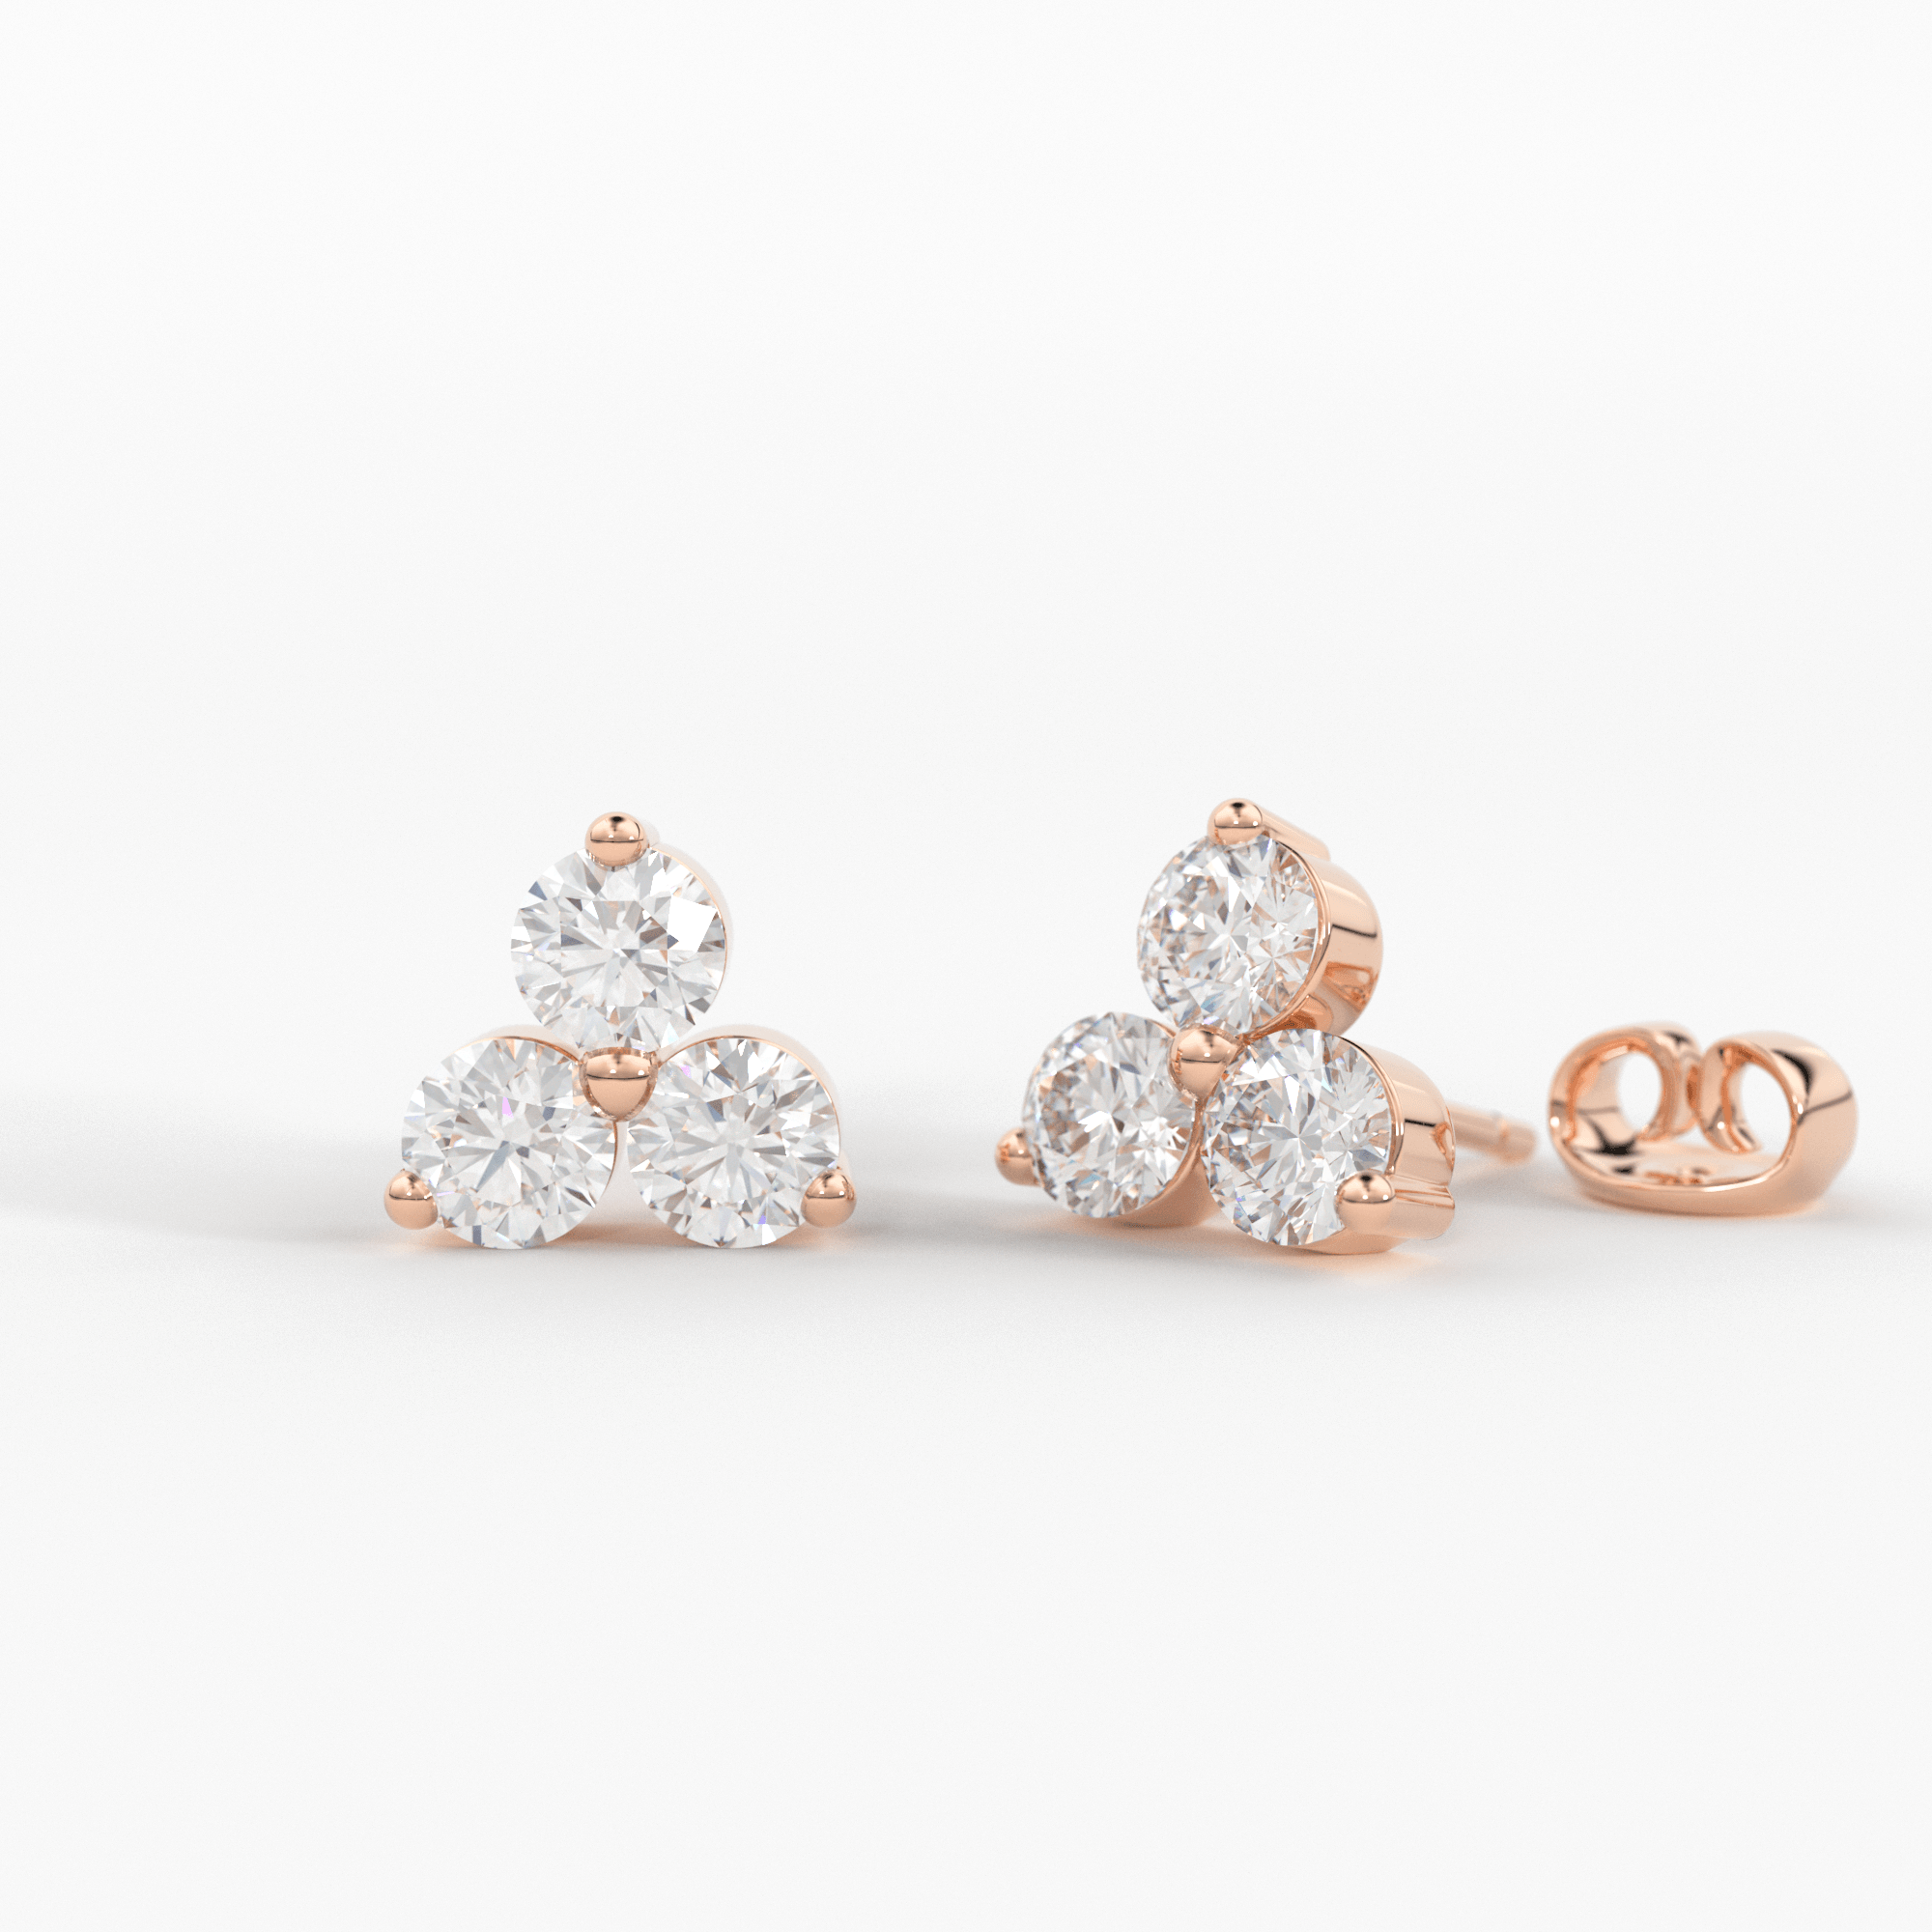 14K Gold Round Cut Diamond Trio Tiny Stud Earrings / Simple Three Stone  Cluster Earring / Tiny Diamond Studs / 3 Stone Studs / Gift for her - 14Kt